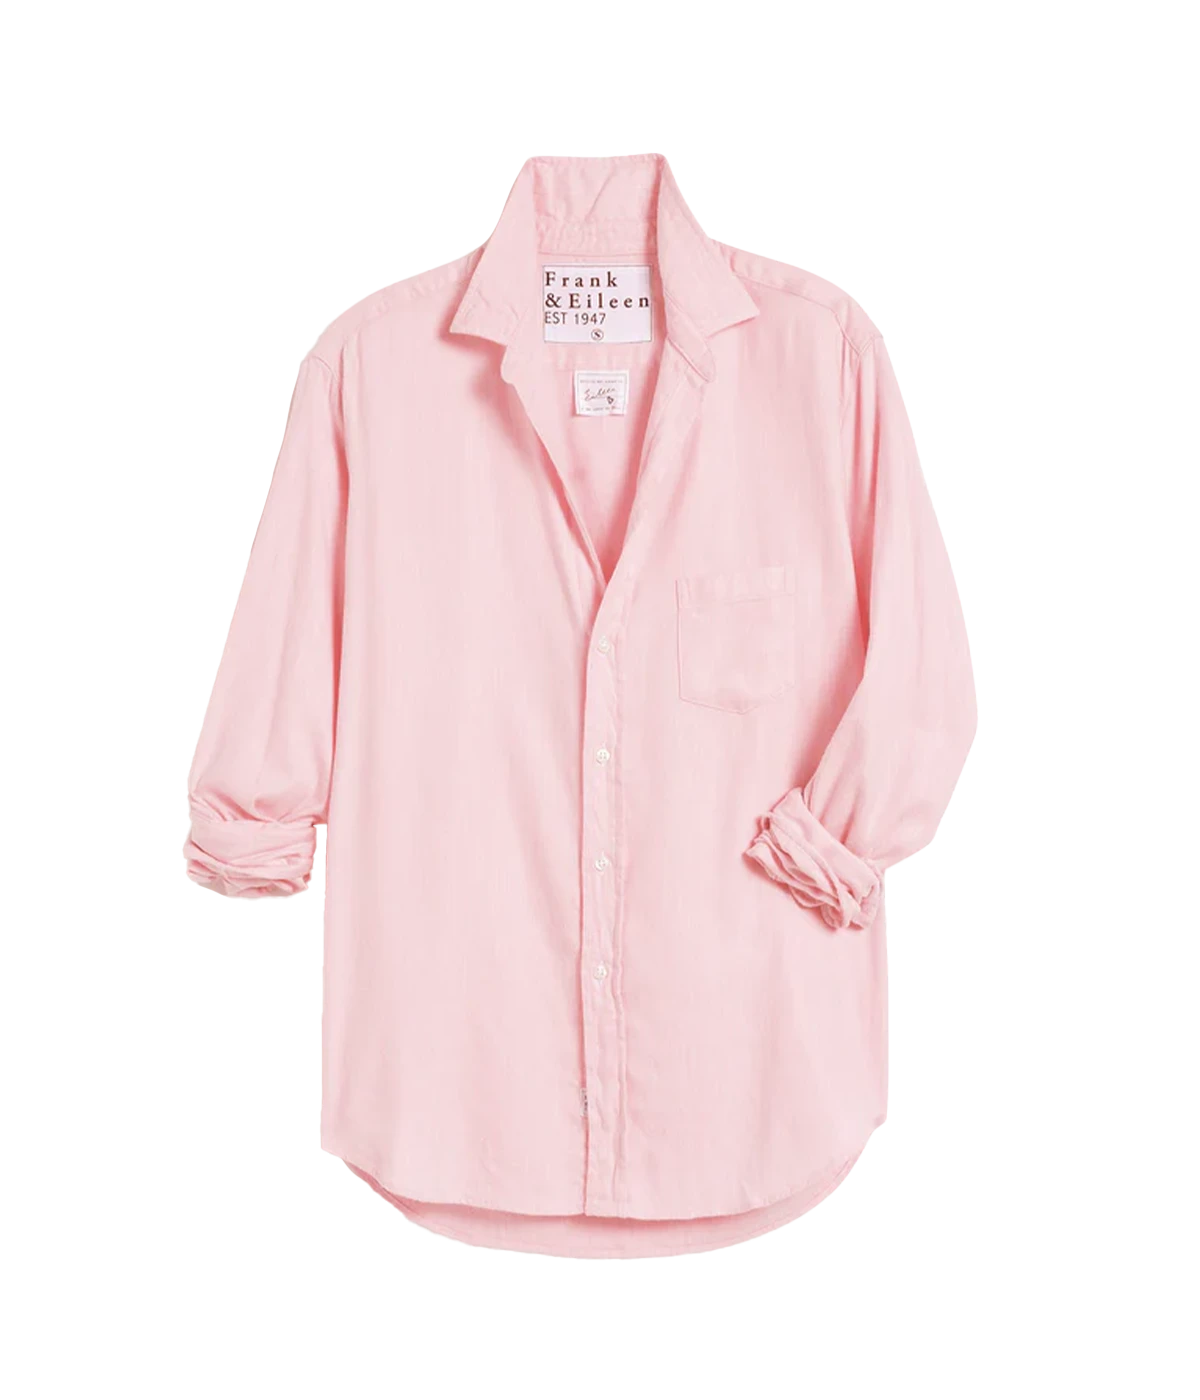 Crafted from a luxuriously smooth, cashmere-touch fabric that feels otherworldly against the skin, this is Frank and Eileen’s best-seller, the Eileen Shirt. A blend of their finest fabrics, Italian Cotton and Italian Tencel, together with added brushing for a super soft finish, wash and wear this bra-friendly pink button up shirt all year. 